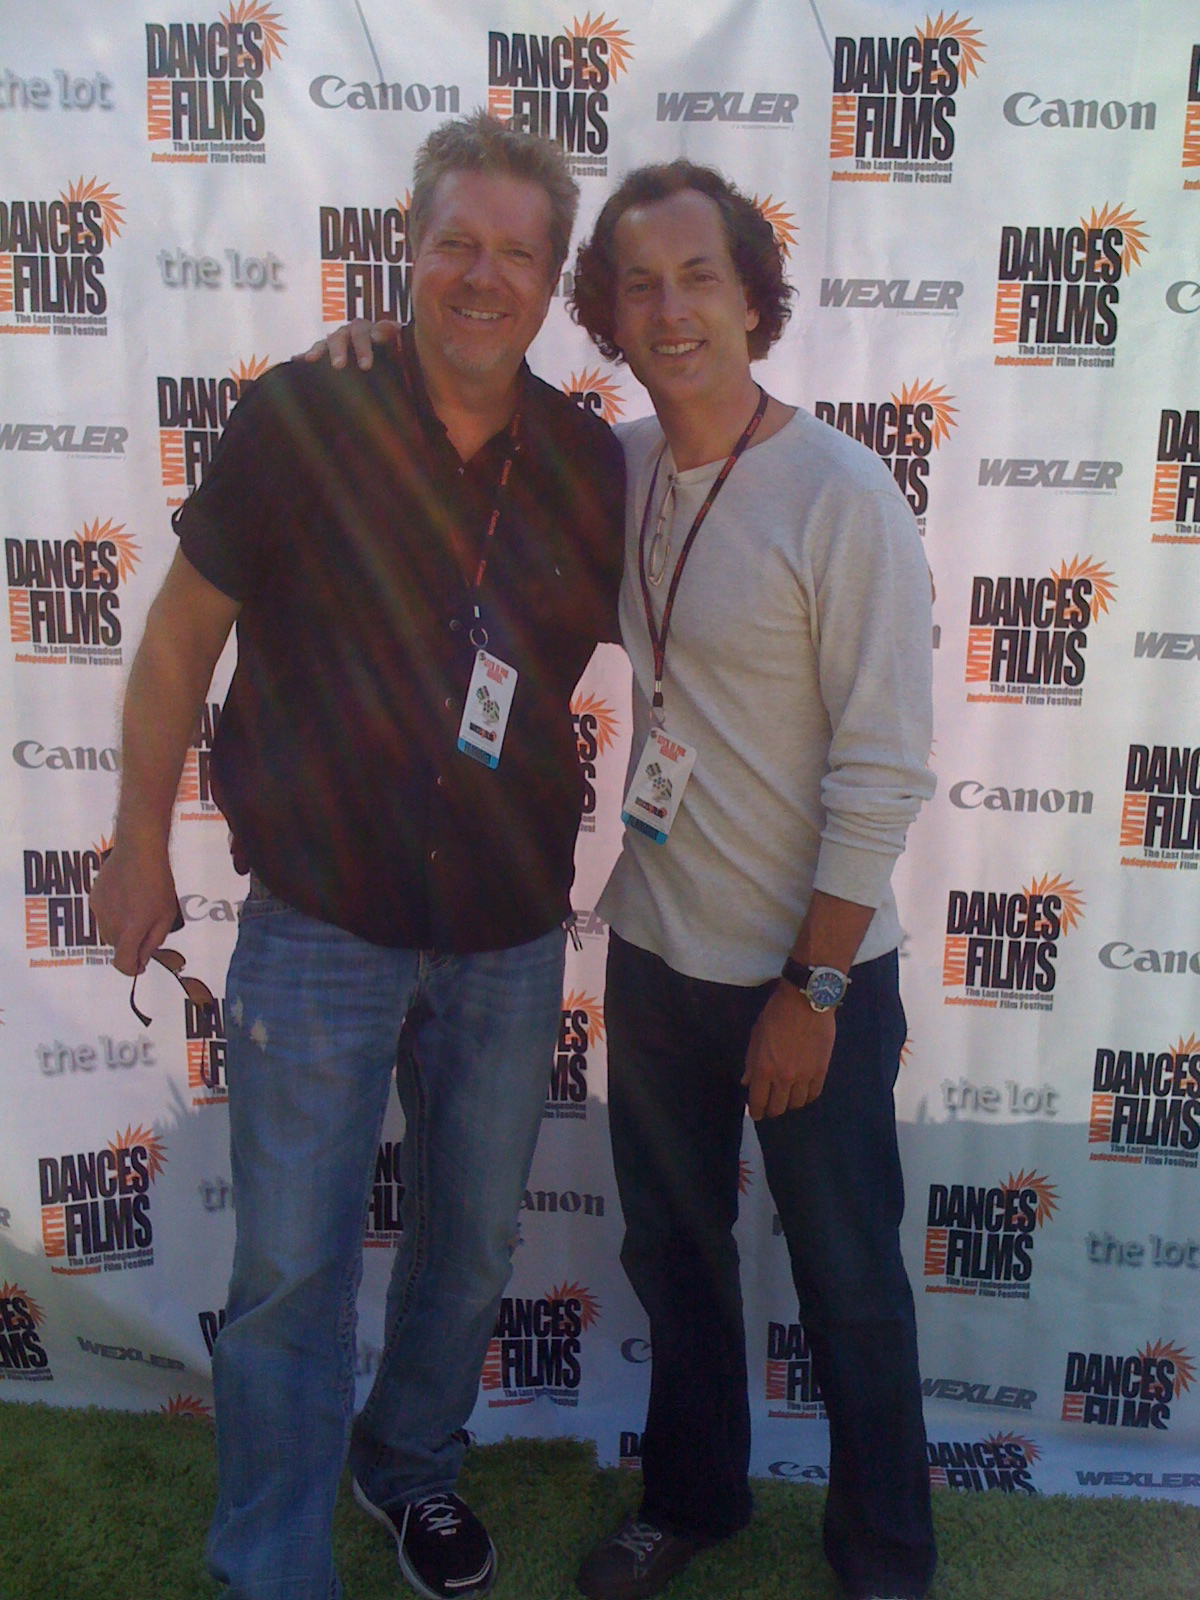 Drummer John JR Robinson & Director Todd Felderstein at the premiere of THE ROAD: RETURN TO FUNK at the 2010 Dances With Films festival in Los Angeles.